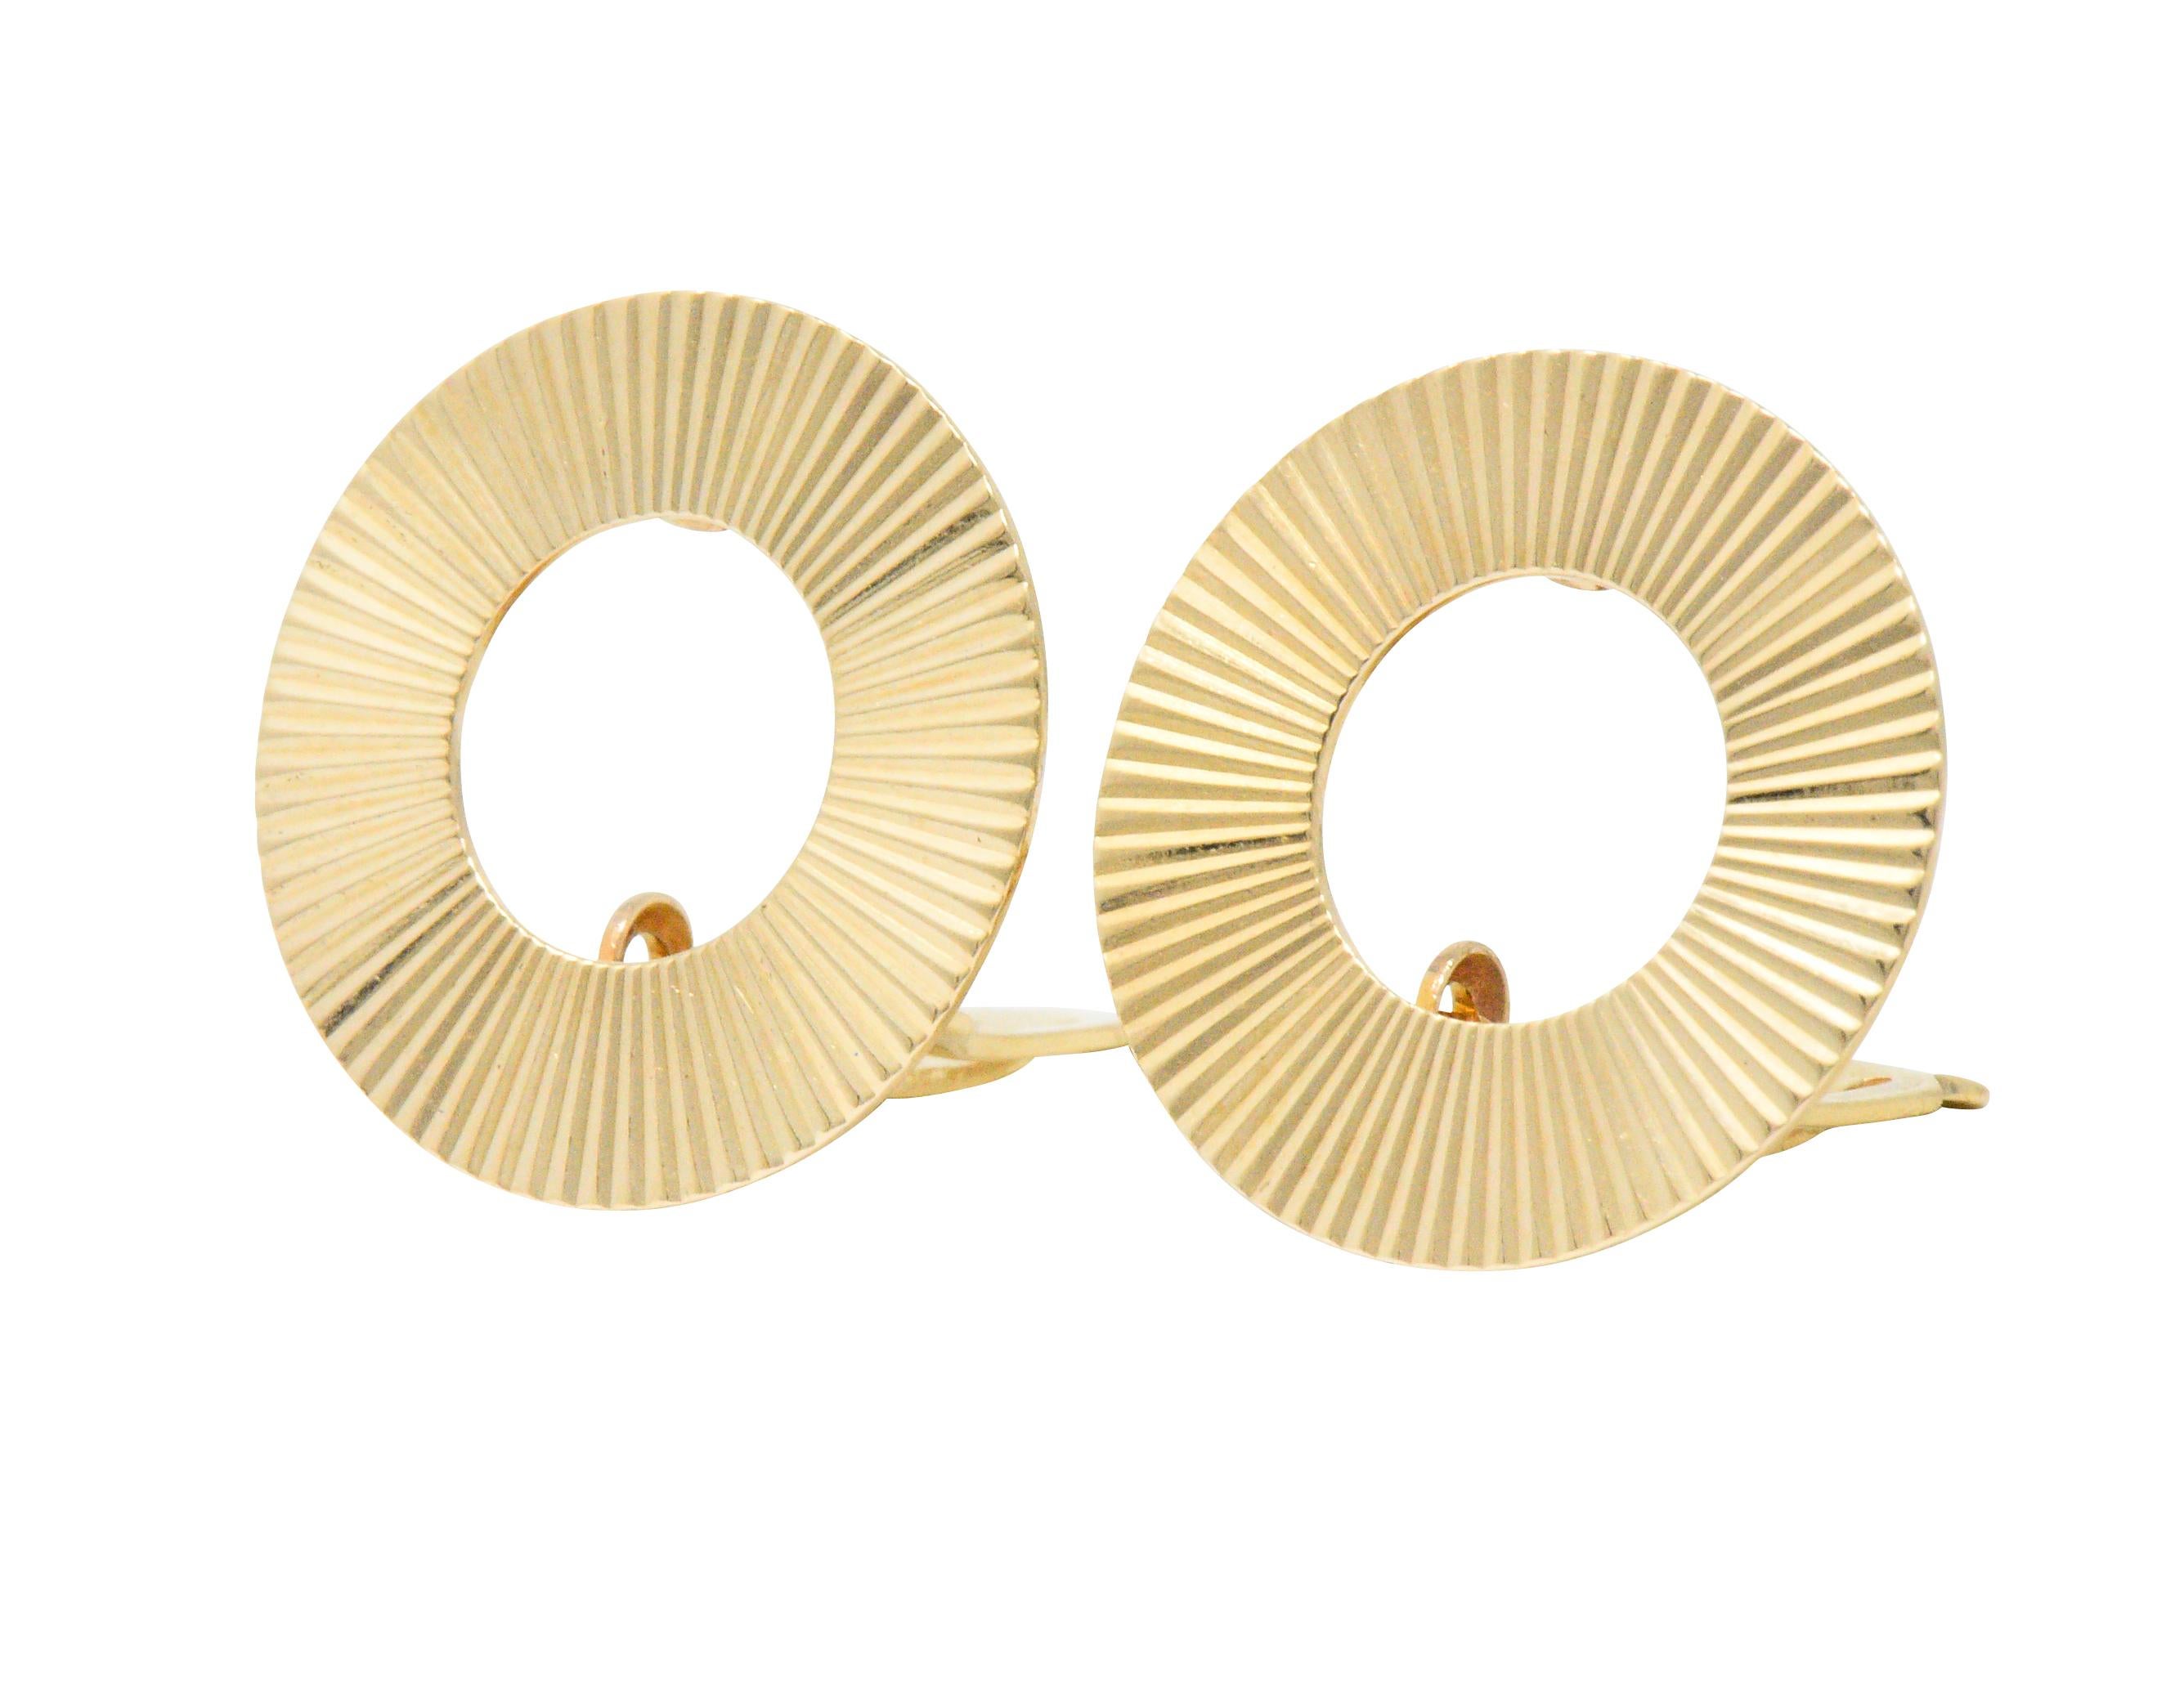 Designed as ribbed highly polished gold, open circles

Fully singed Tiffany & Co.

Hinged clip backs

Diameter: 3/4 Inch

Total Weight: 5.3 Grams

Classic. Bright. Clean. 

We- 1706